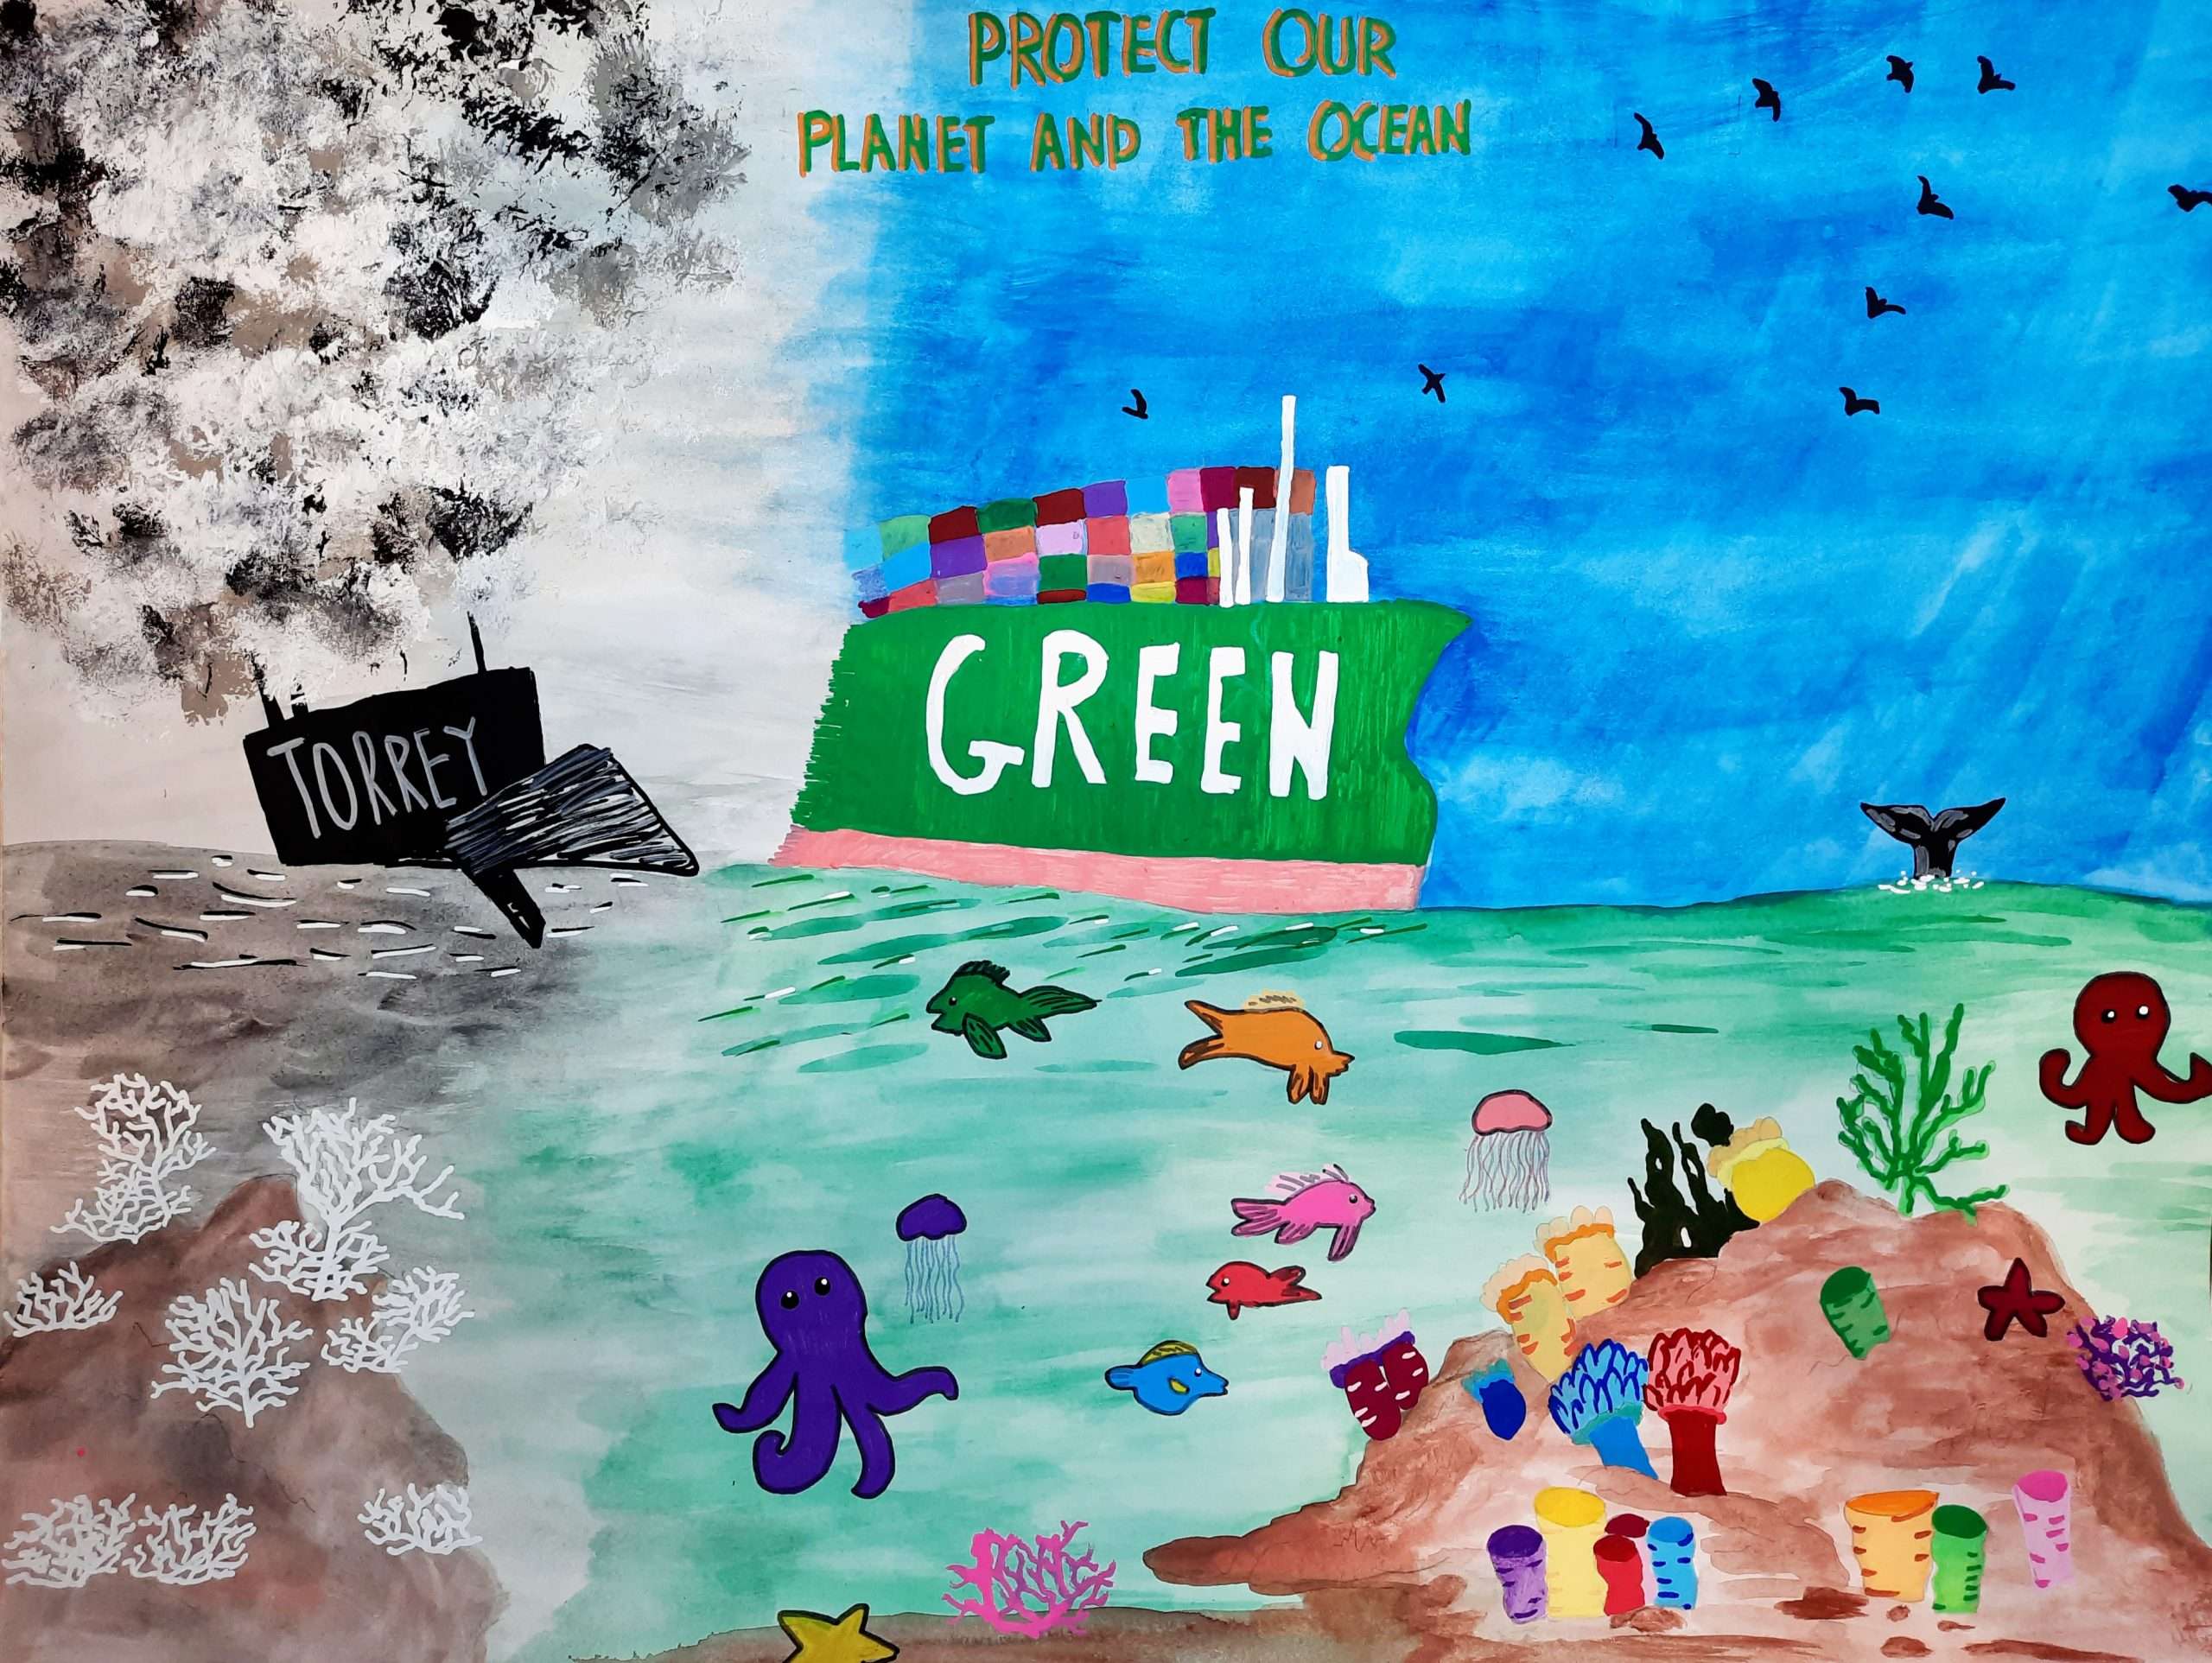 The drawing is split into two vertical halves. On the left side is a barren sea floor with a sunk ship with the text "Torrey" on it and black smoke clouds. On the right side is a lush and colorful ocean with sea creatures and plants. A ship with the text "Green" is on the surface. Text at the top of the drawing says "Protect our Planet and the Ocean."